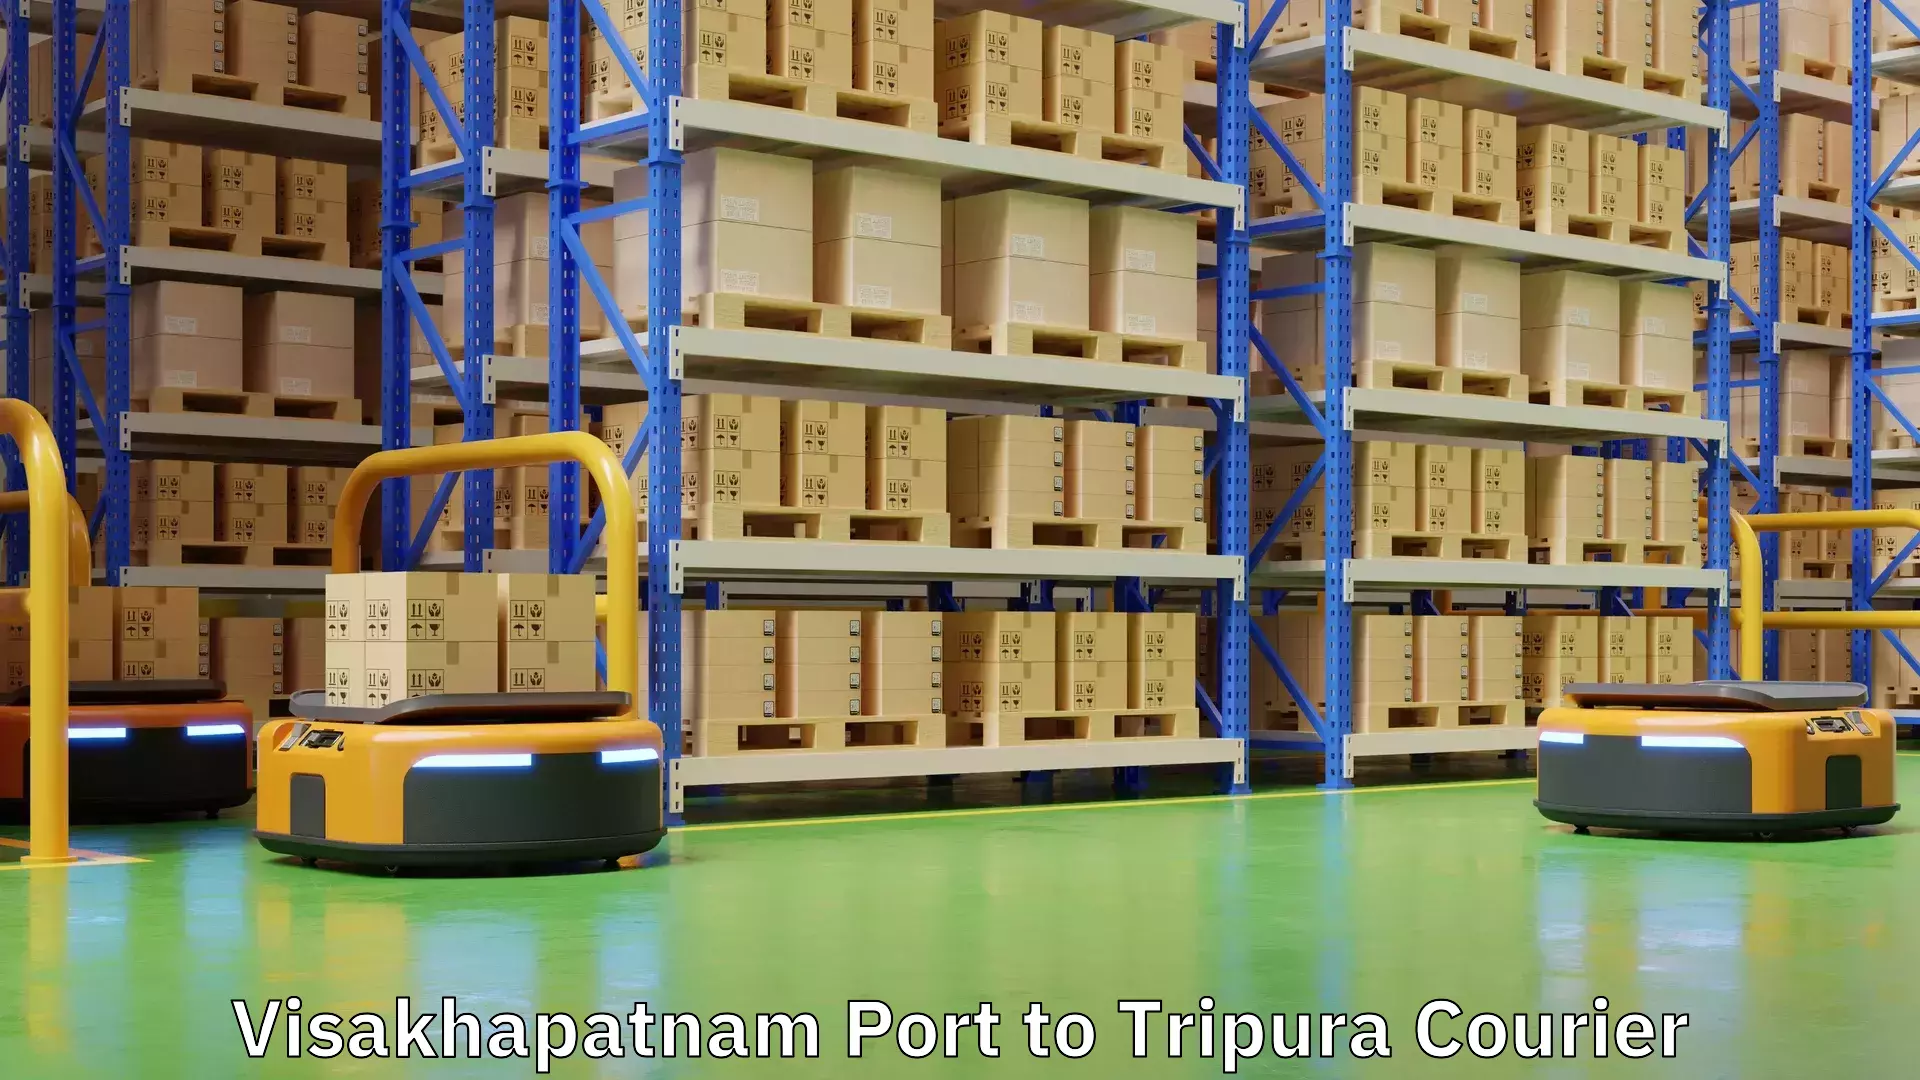 Multi-national courier services Visakhapatnam Port to Tripura